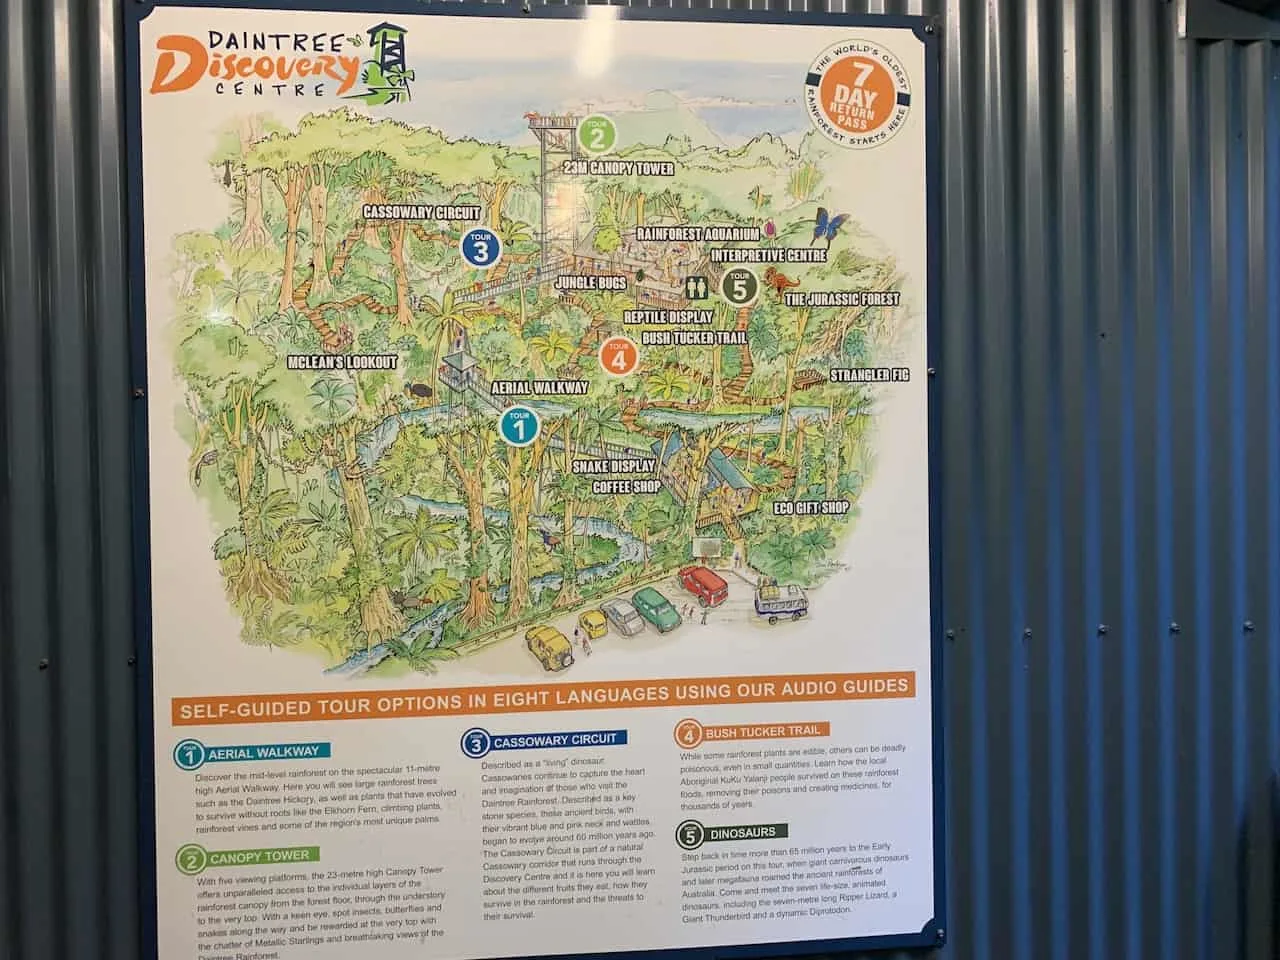 Daintree Discovery Centre Map